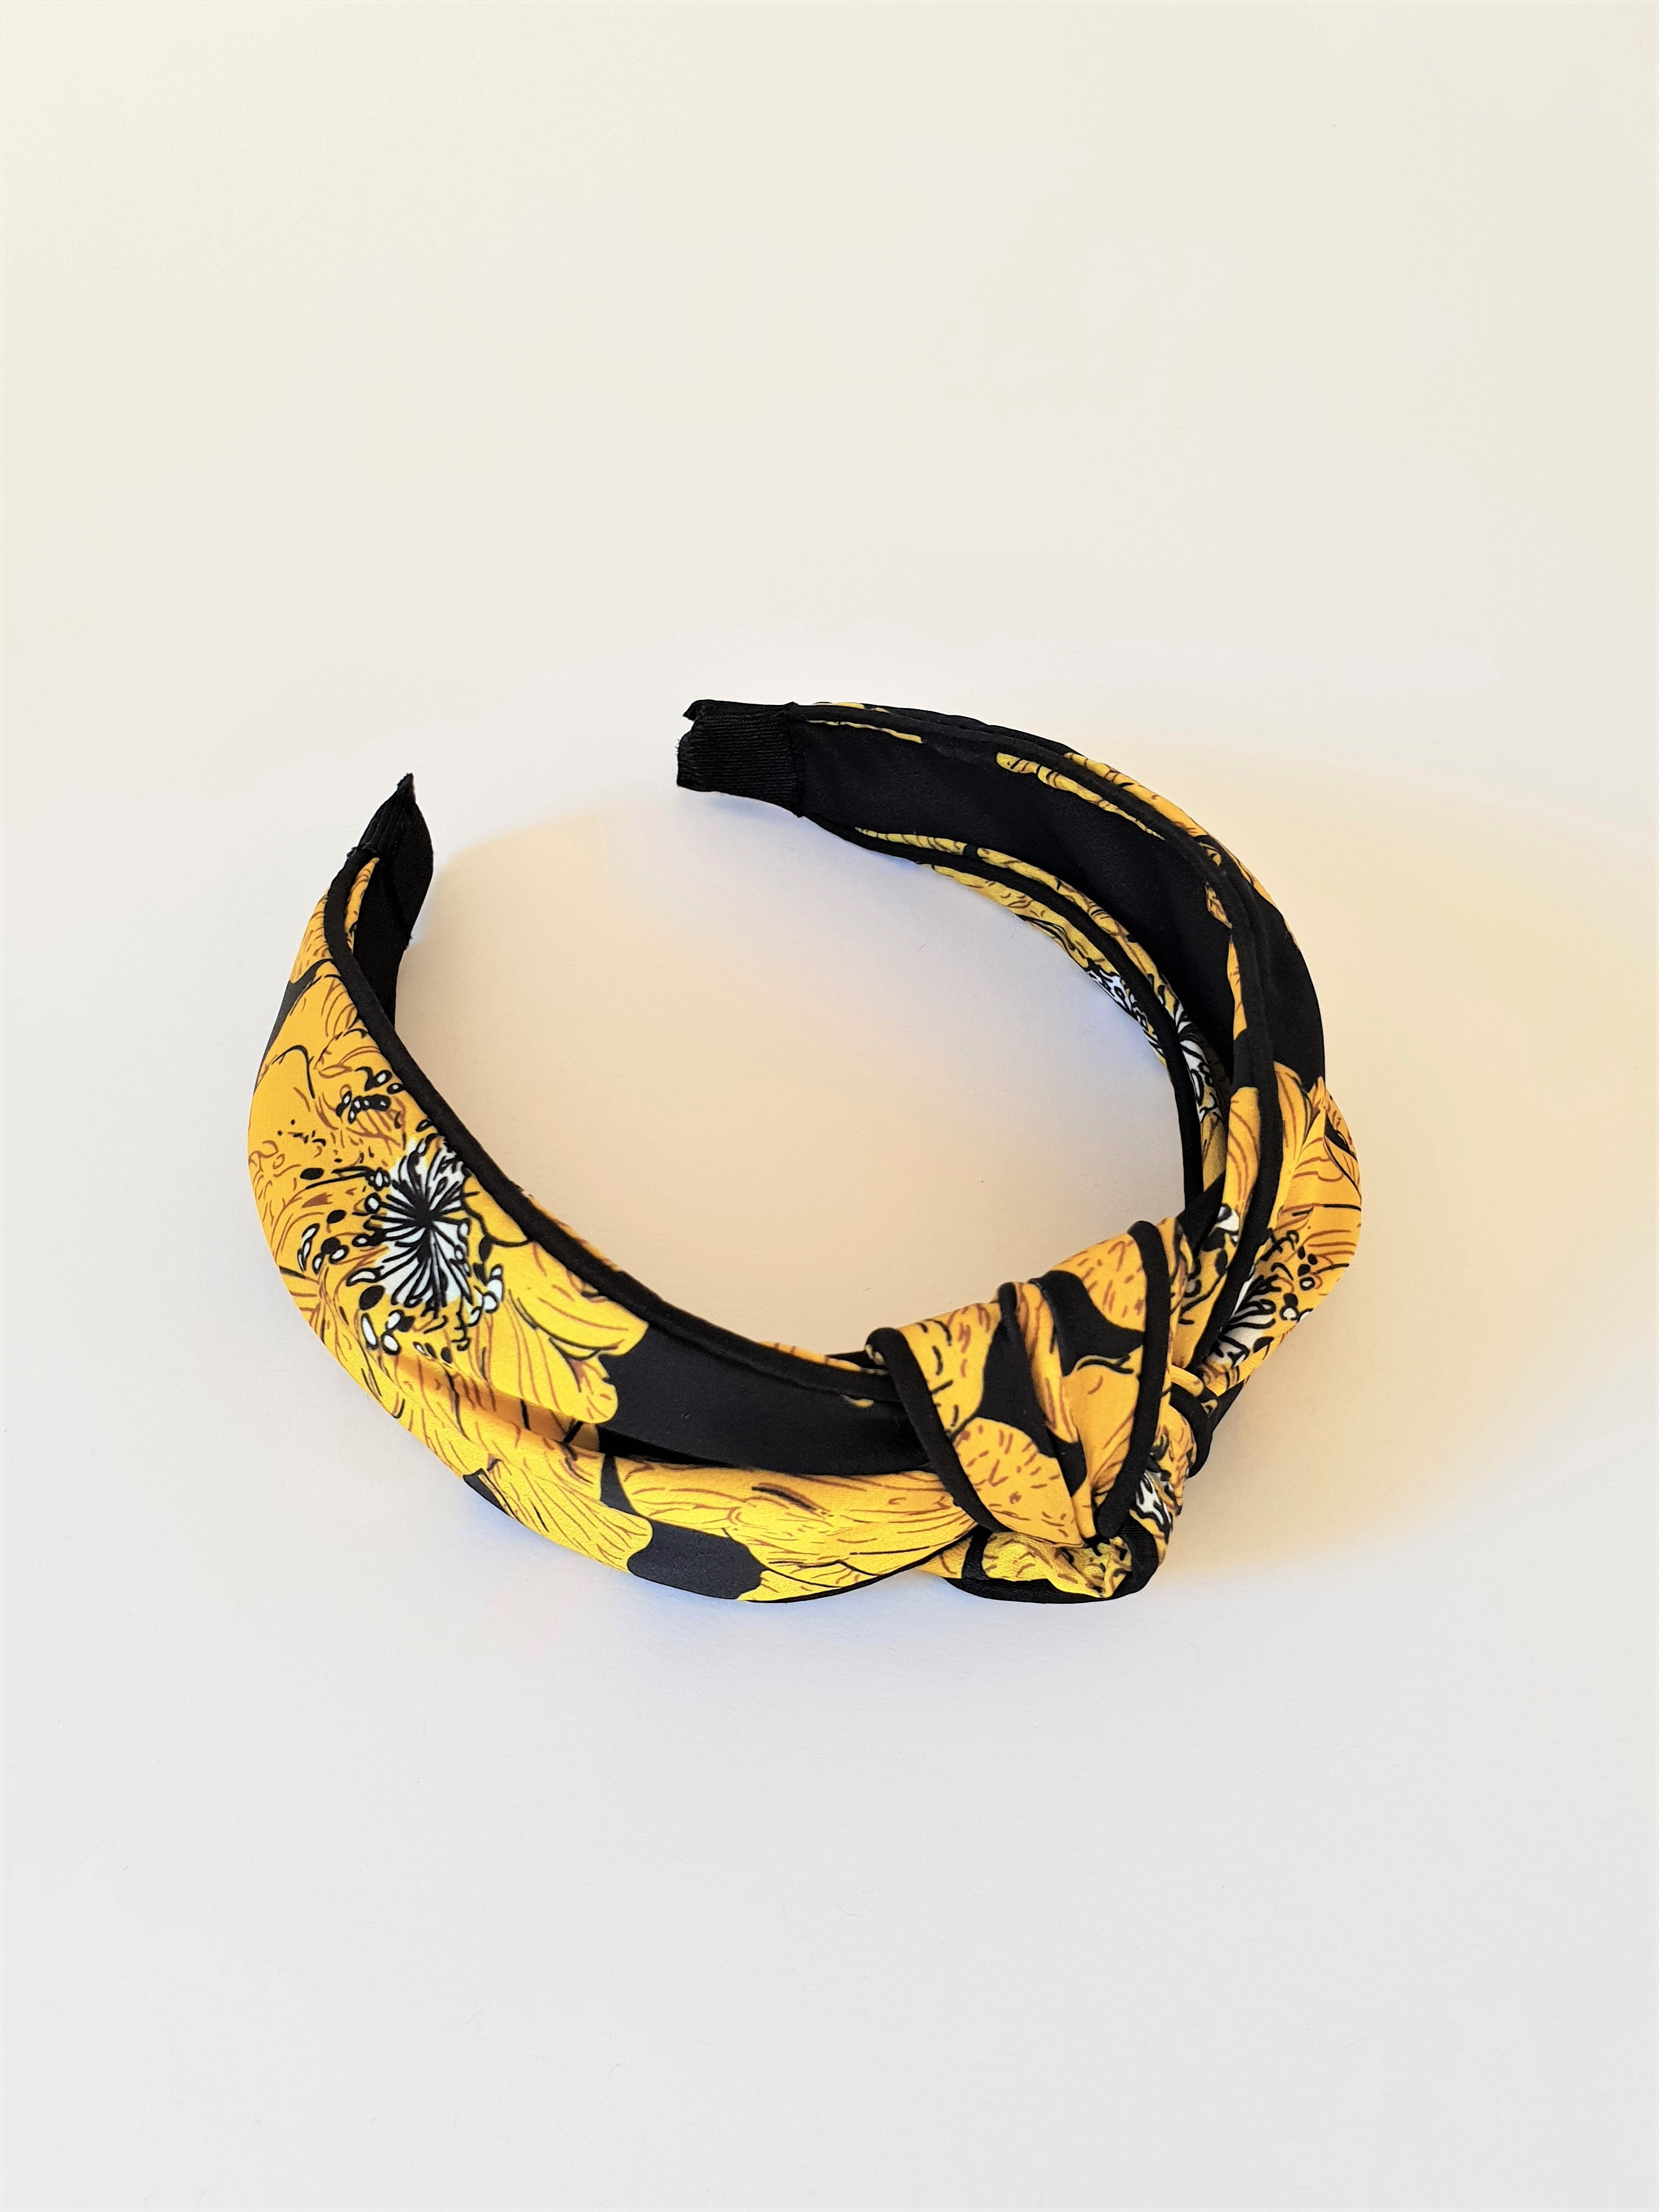 FLORAL SATIN KNOT ALICE BAND - YELLOW